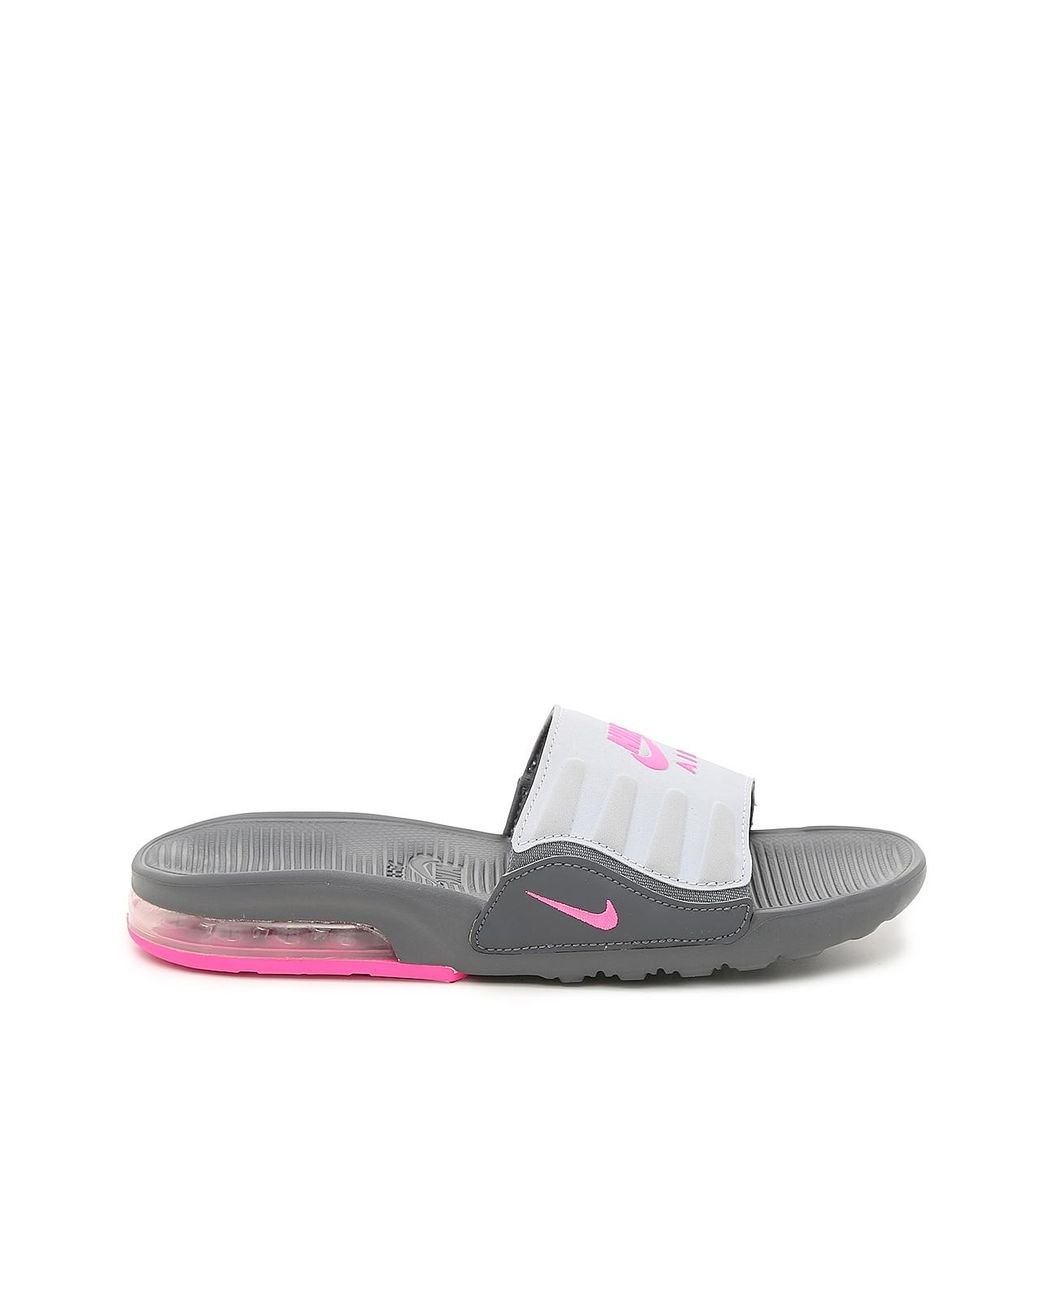 Nike Max Camden Sandals in Grey/Pink (Gray)